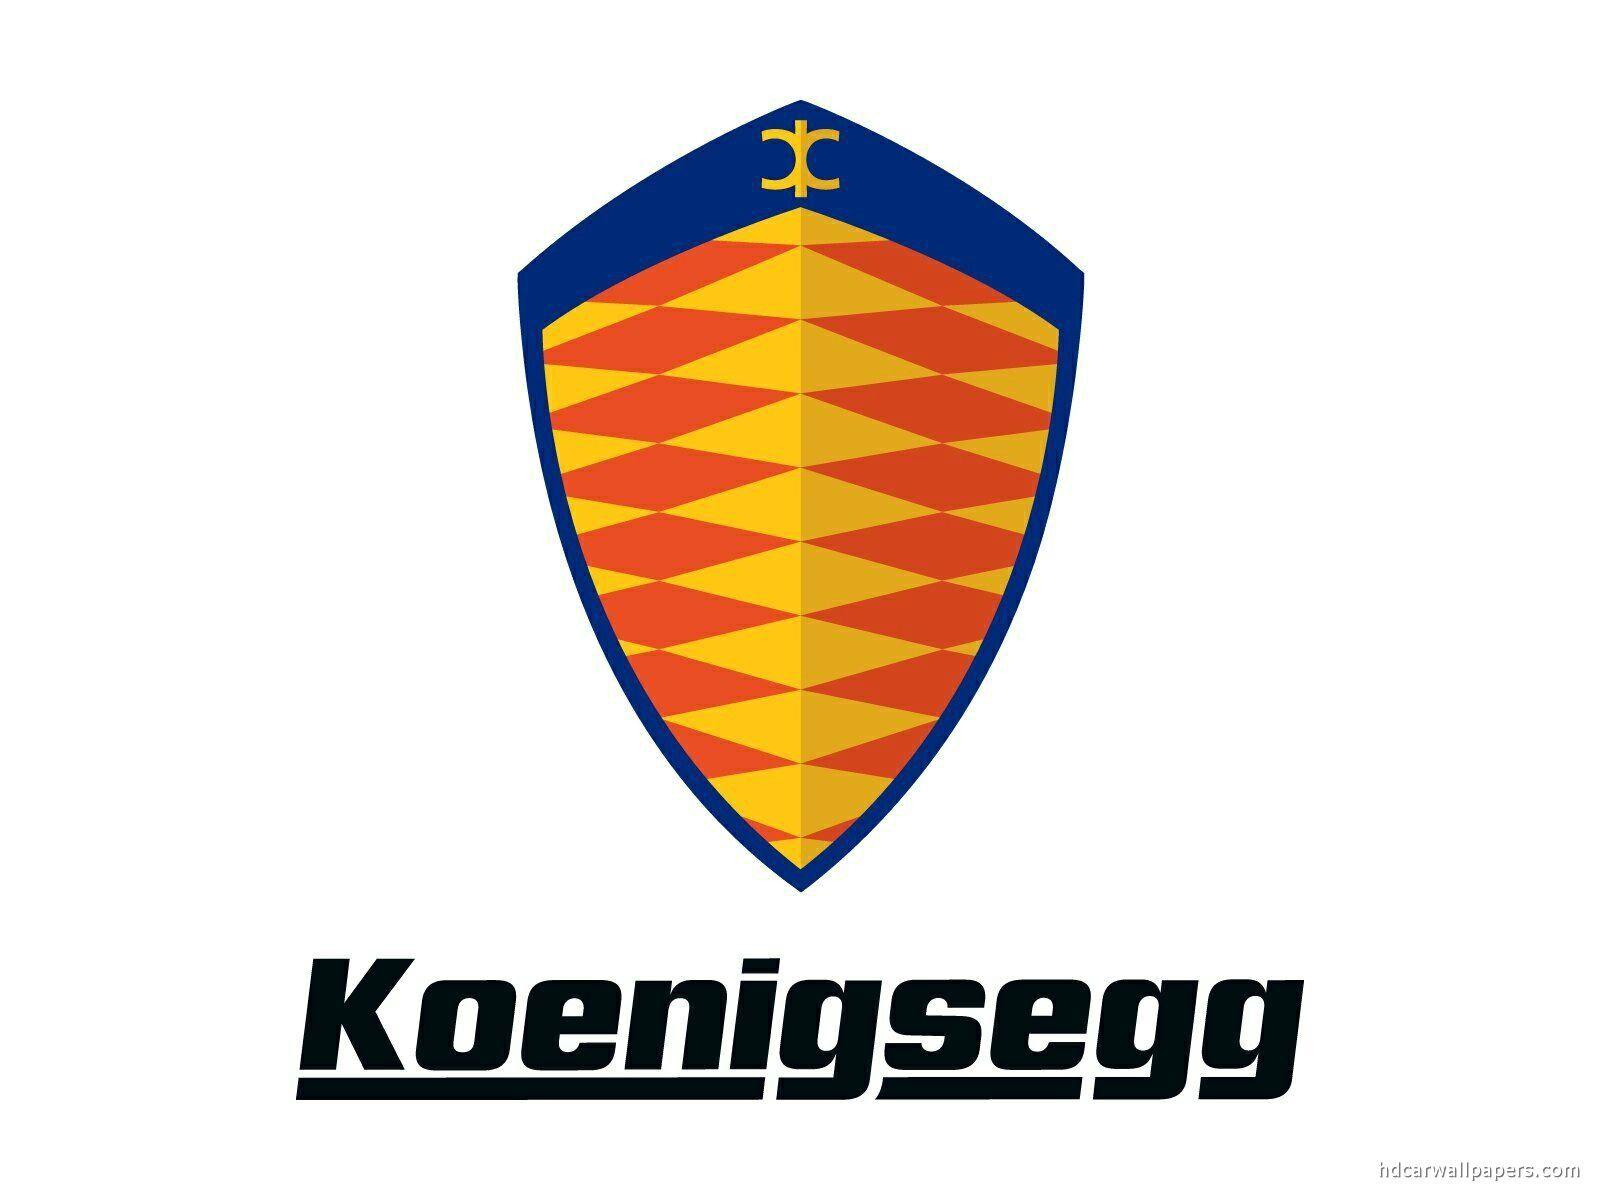 Koenigsegg Ghost Logo - Koenigsegg. Who Are They And Where Did They Come From? | Global ...